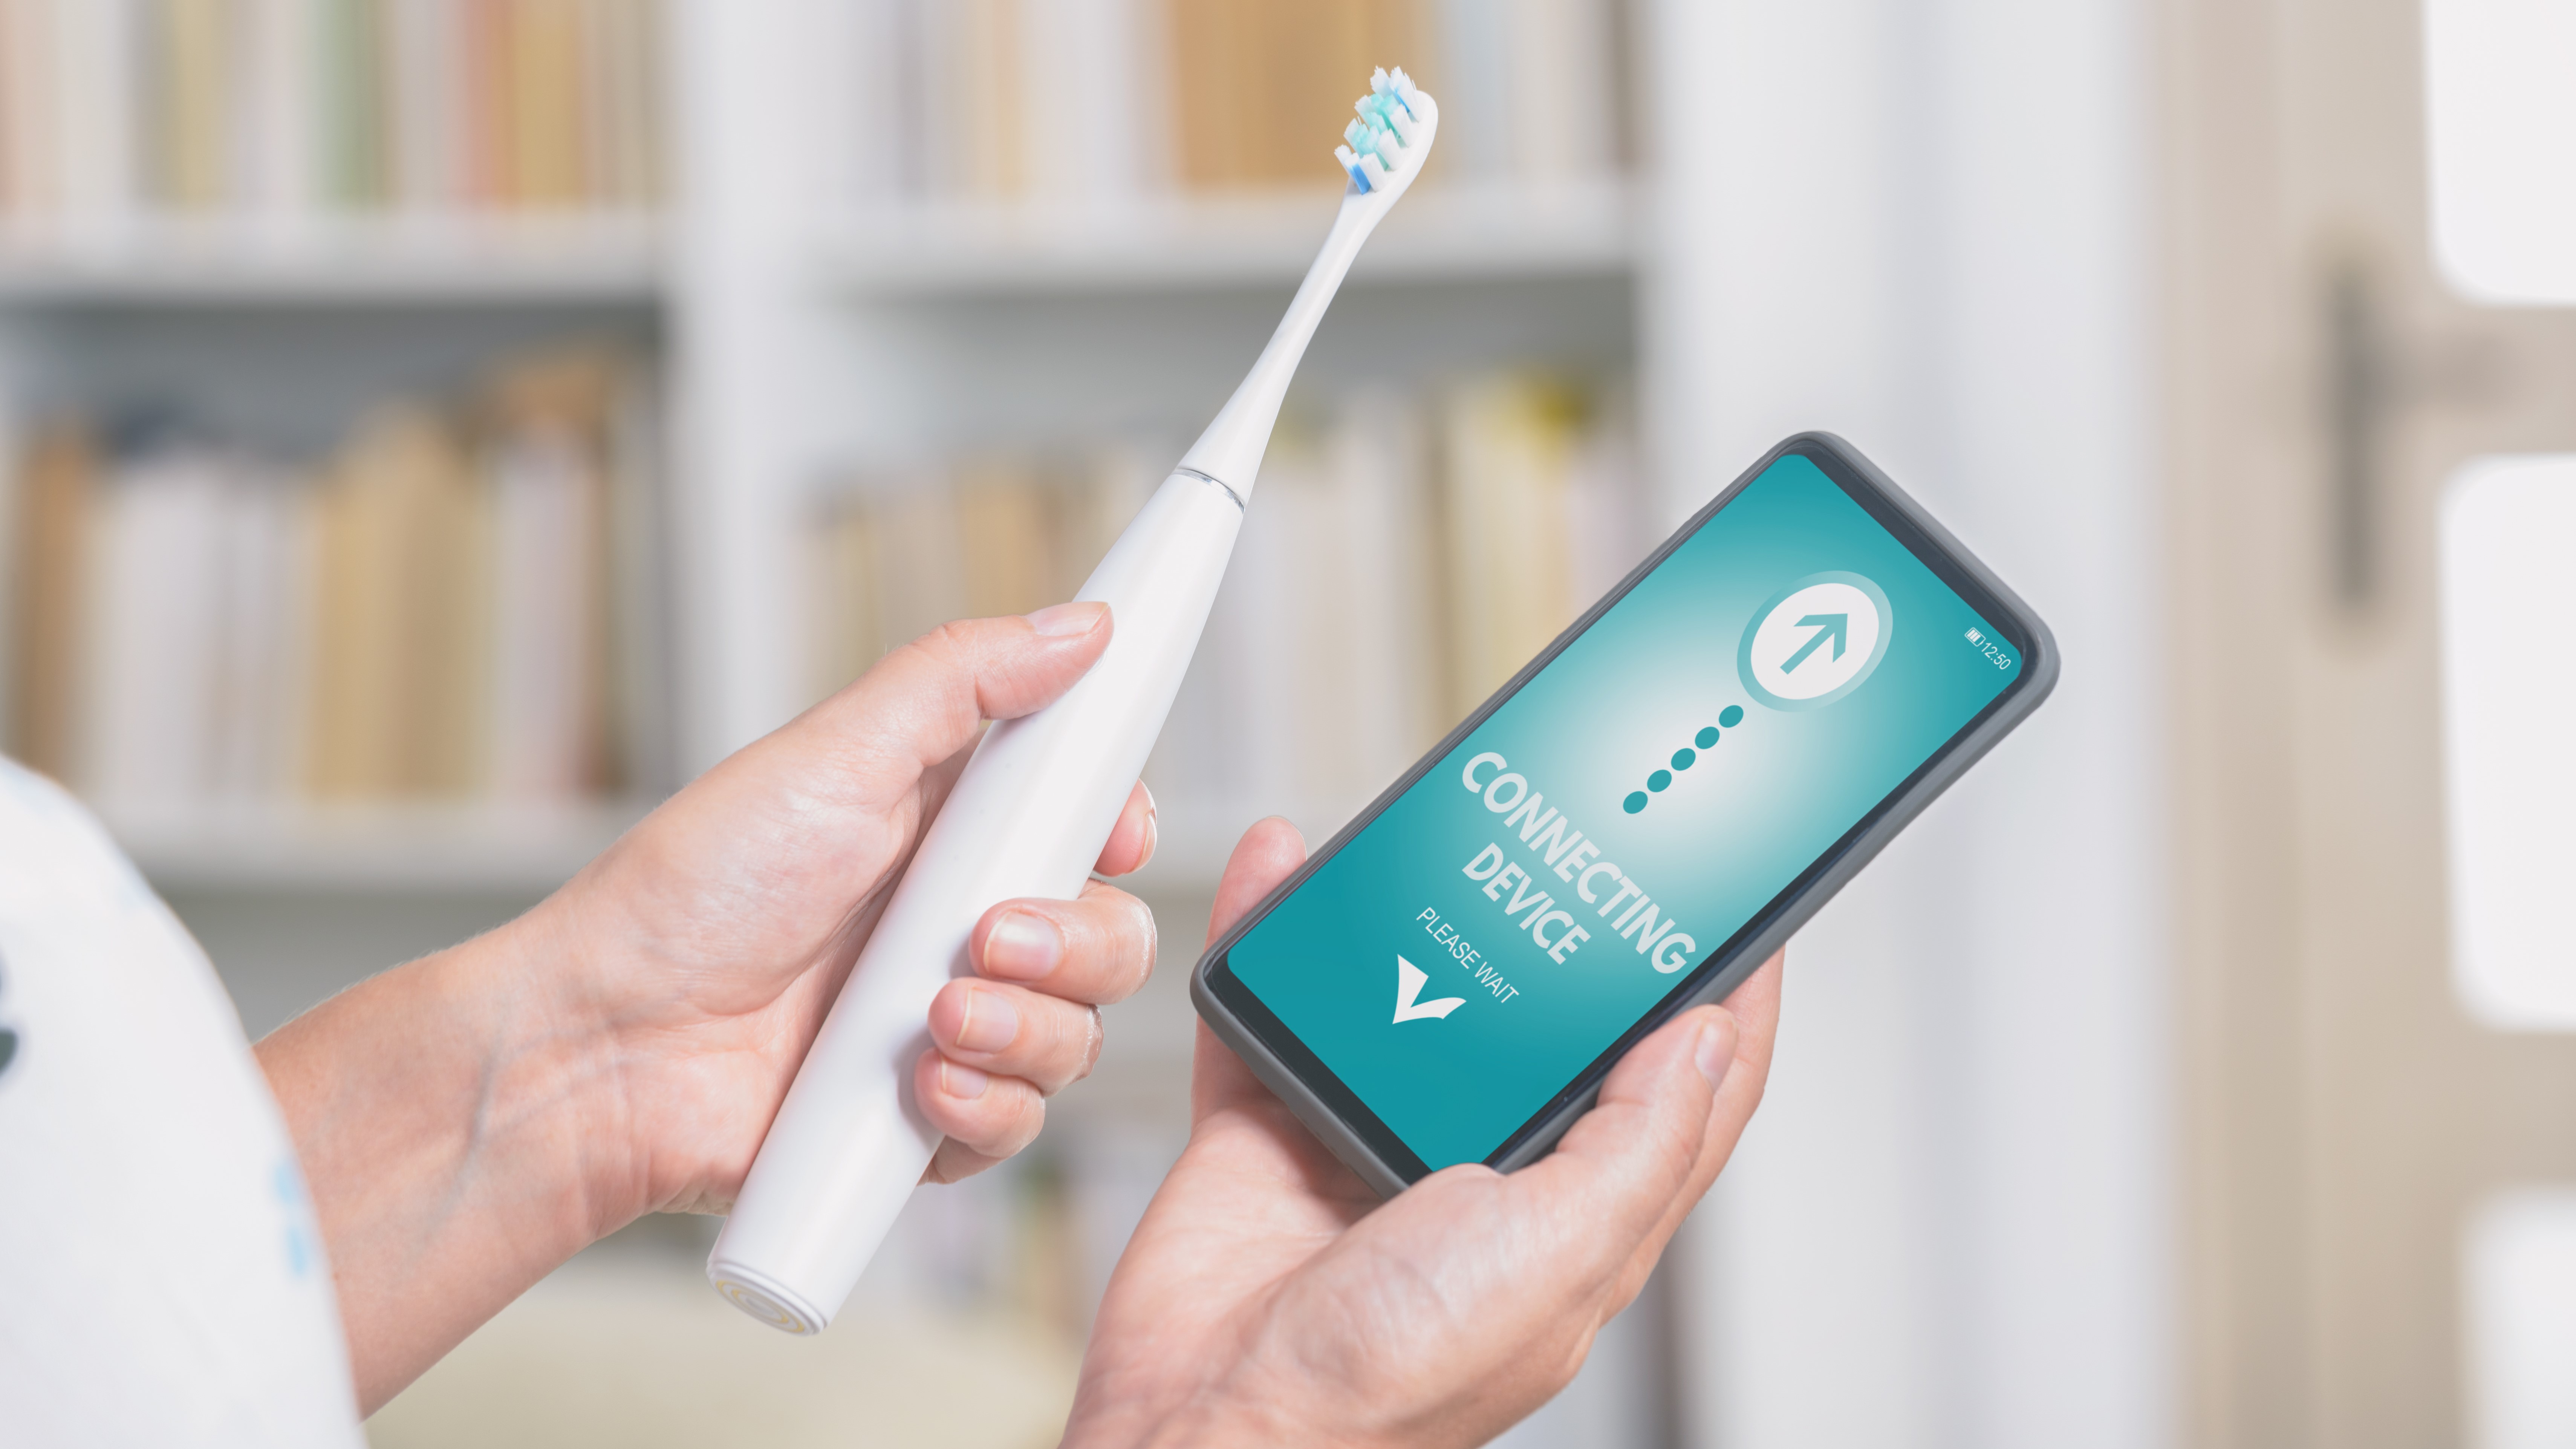 Electric toothbrush with smartphone app